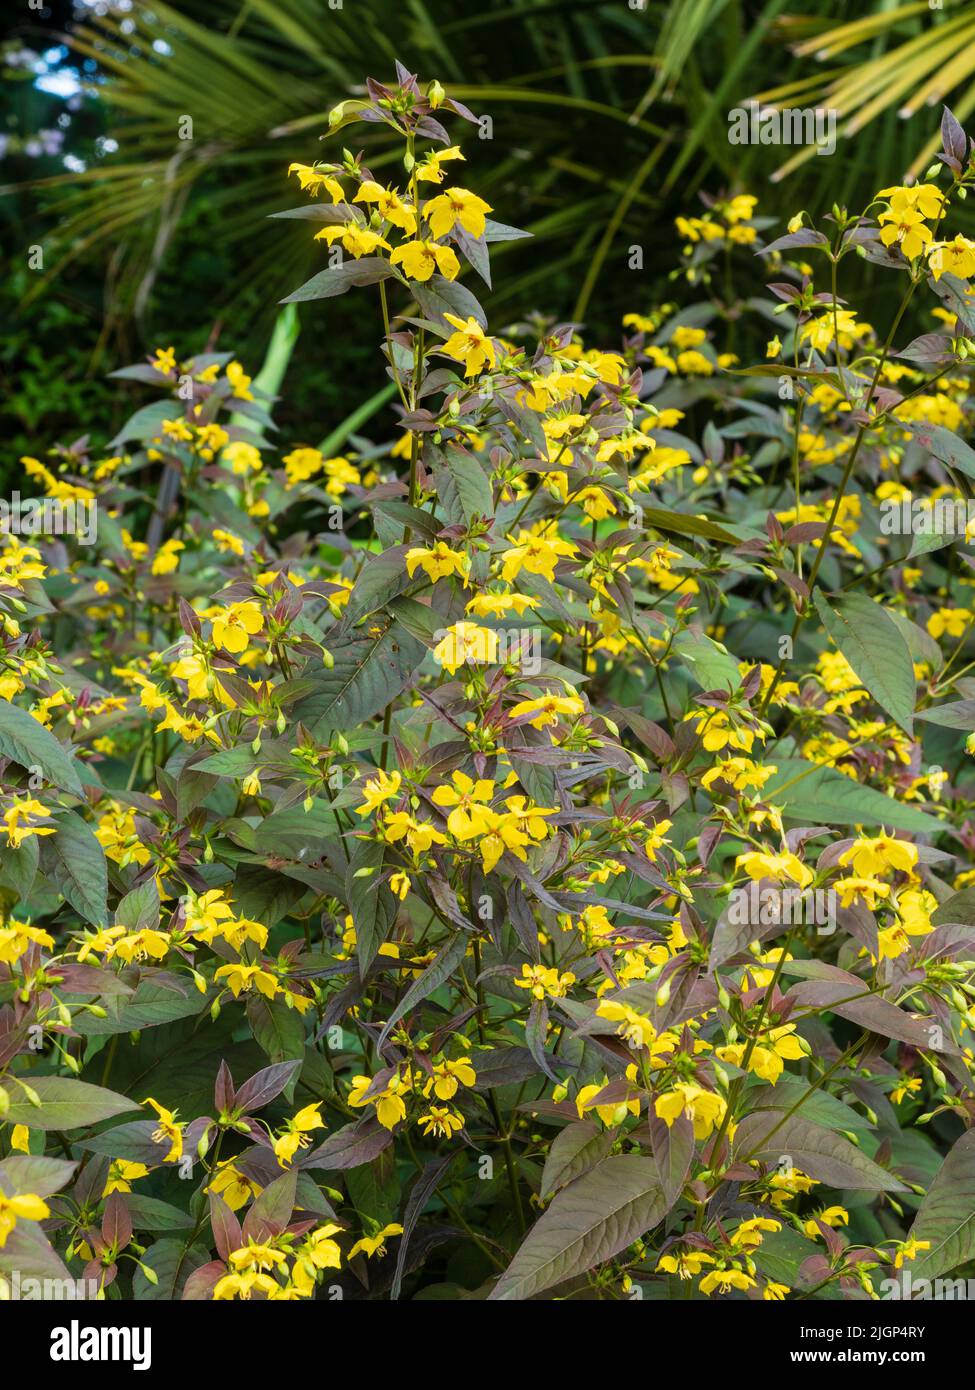 Bronze foliage and yellow leaves of the hardy, summer flowering perennial, Lysimachia ciliata 'Firecracker' Stock Photo